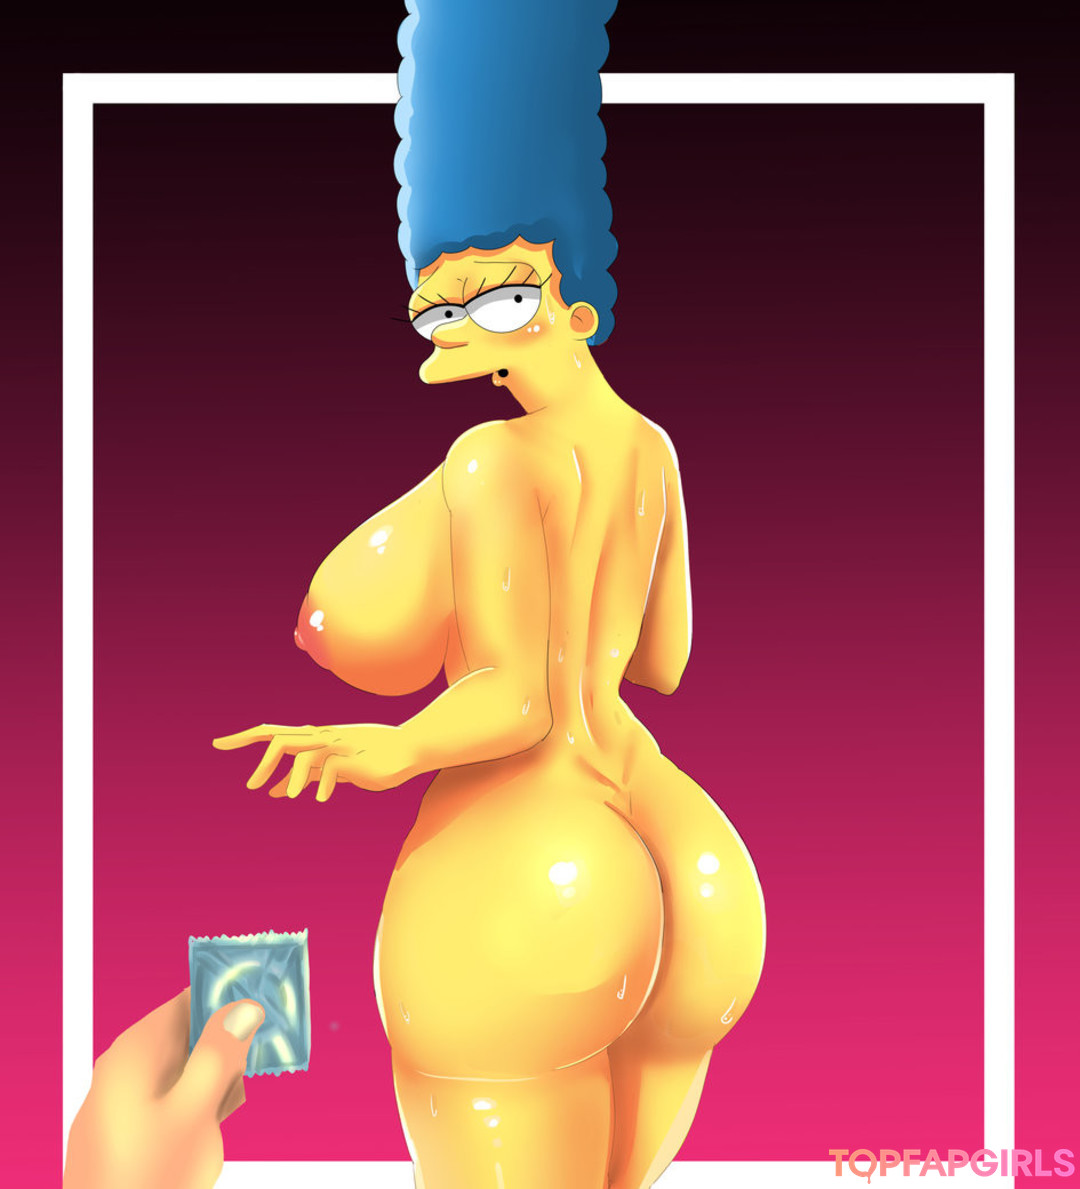 art hodges recommends The Simpsons Nude Pics